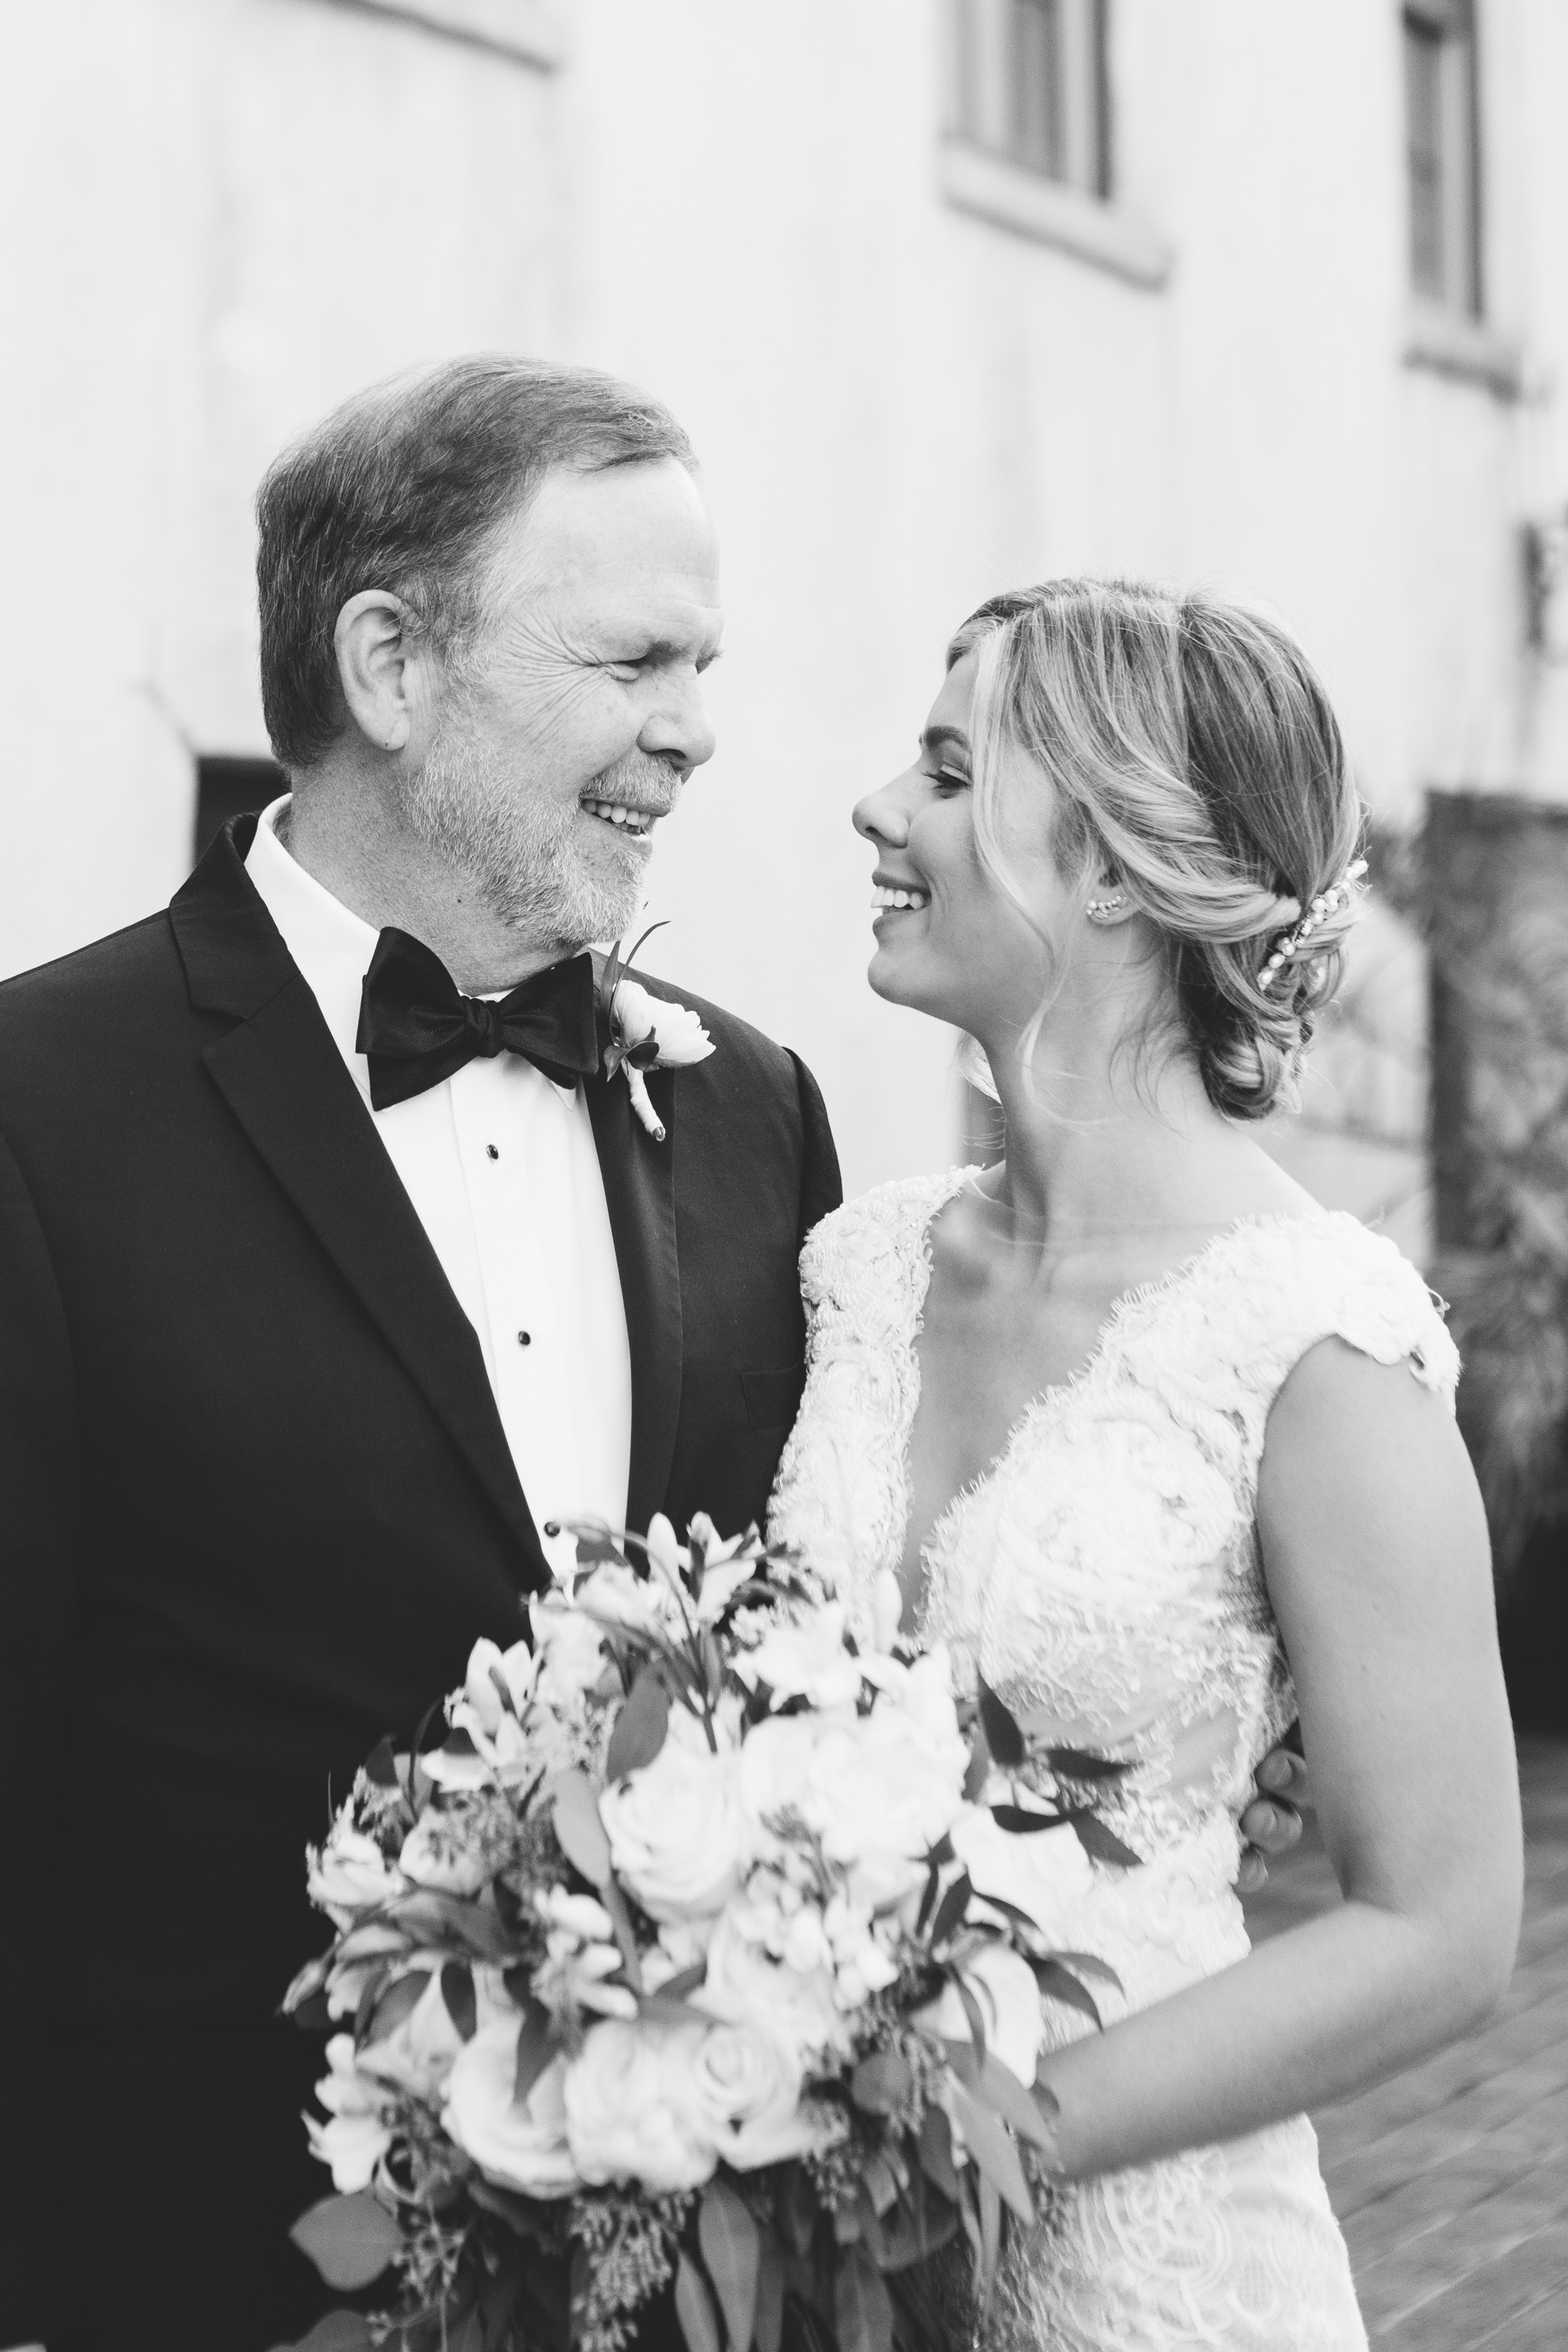 A bride and her dad share a sweet moment during family portraits. Photo by Rebecca Cerasani.